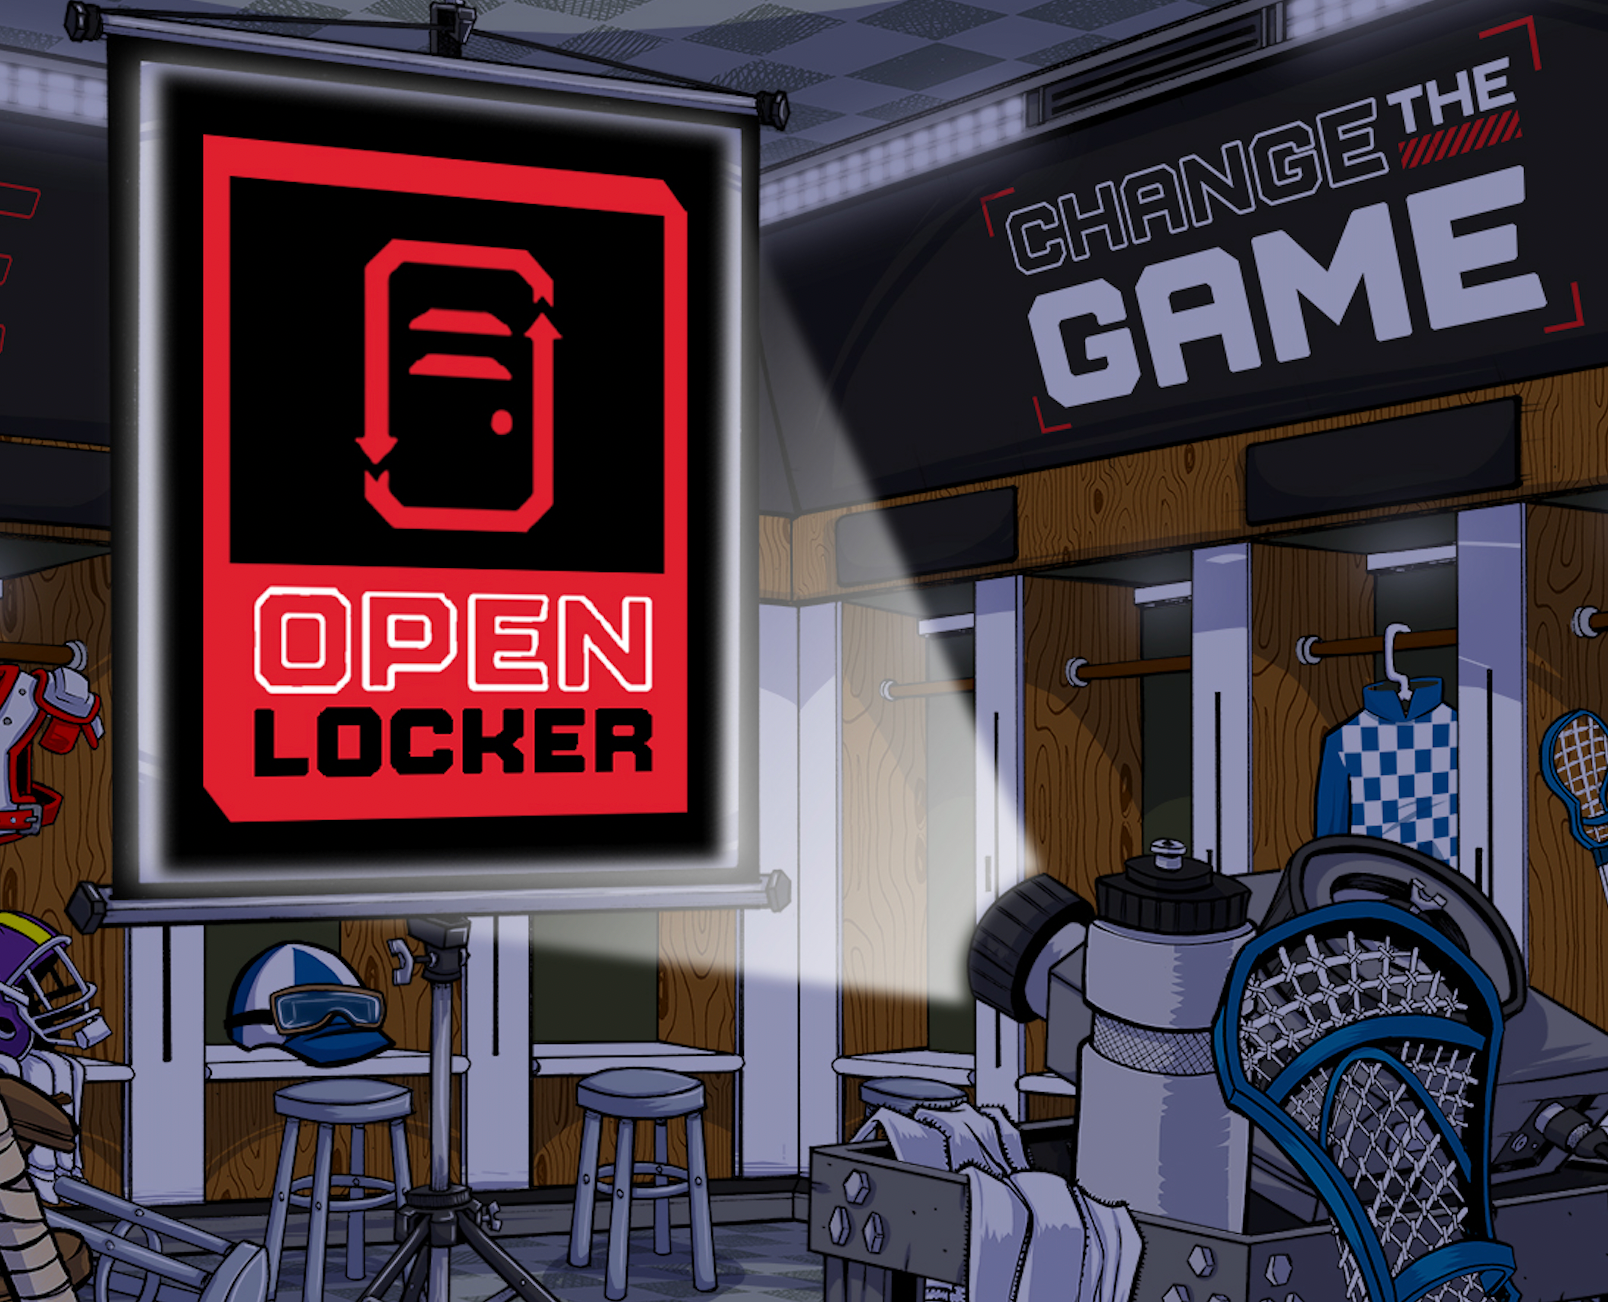 Descrypto Holdings’ Subsidiary OpenLocker Announces Expansion to Additional Universities to Power Next Generation Fan Engagement on Its Web3 Platform with Innovative Digital Collectibles Featuring Name, Image and Likeness of Student-Athlete